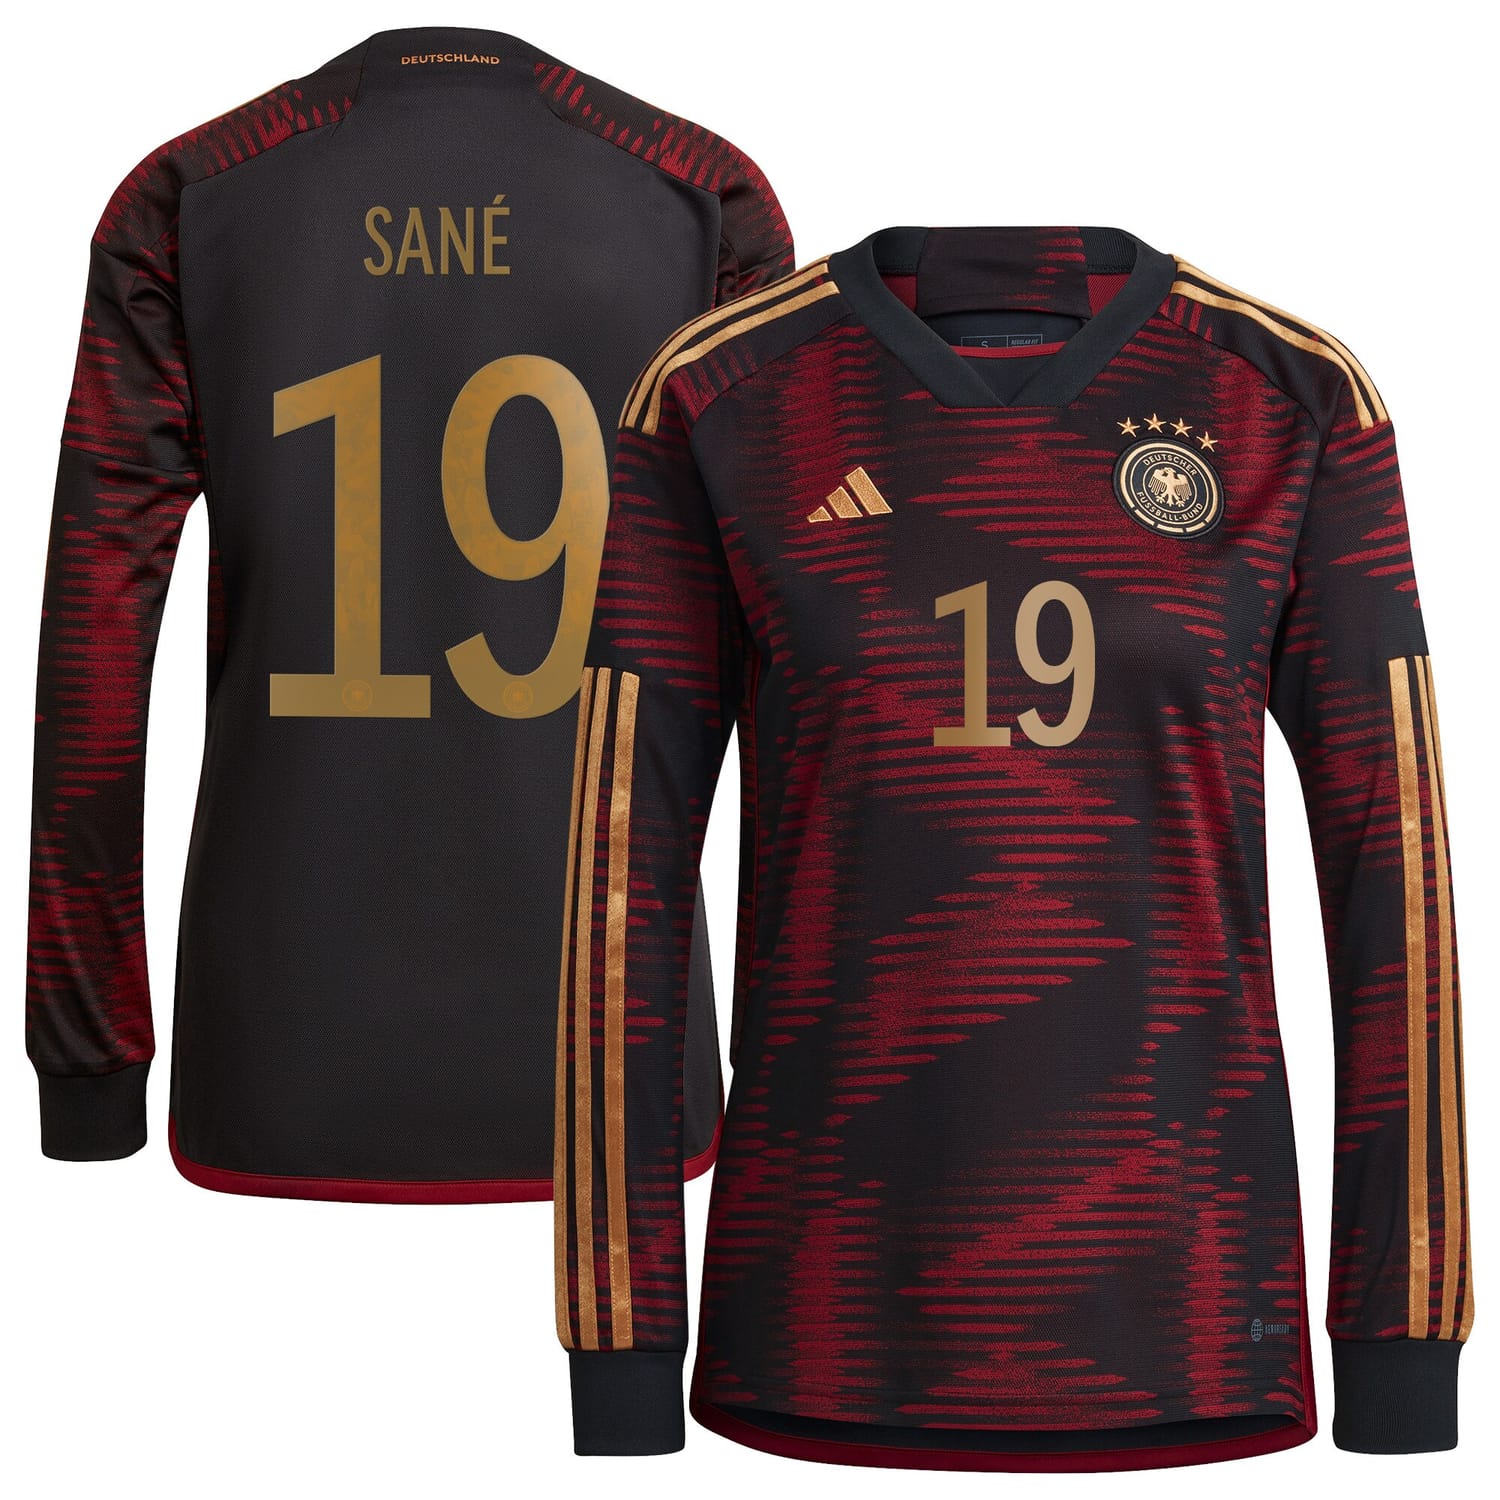 Germany National Team Away Jersey Shirt Long Sleeve player Leroy Sané 19 printing for Women